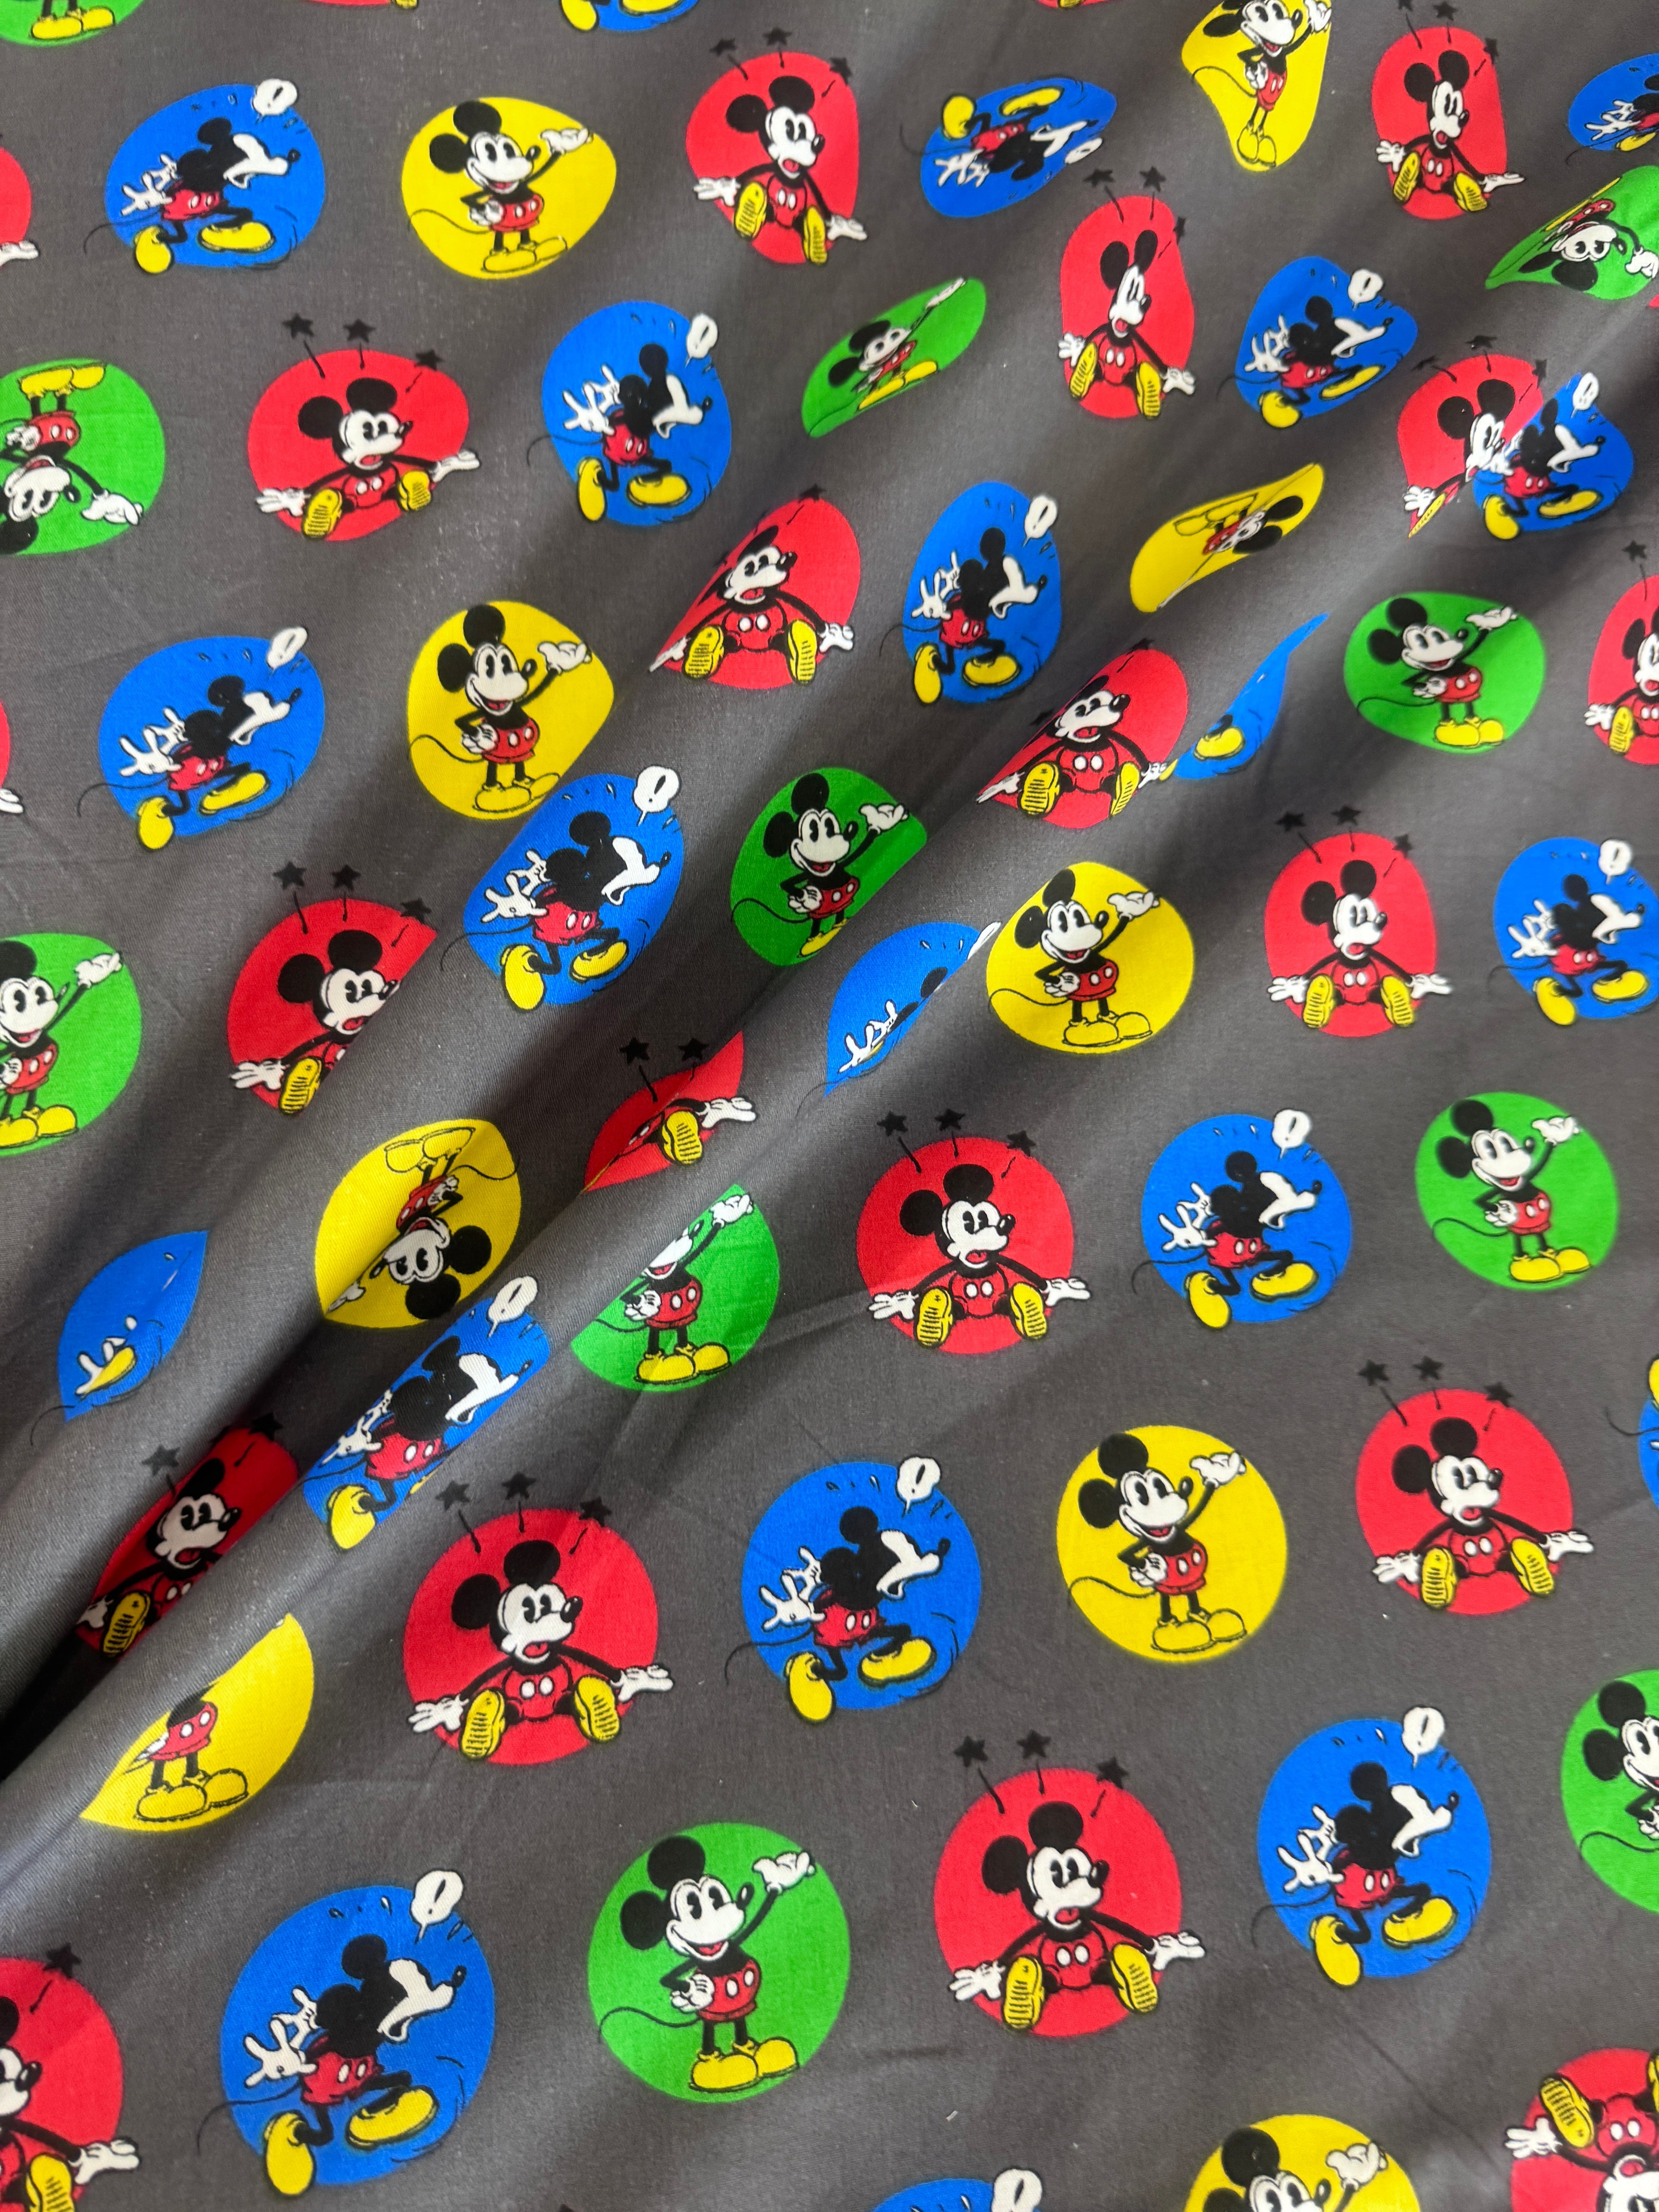 Mickey Mouse Print Cotton, Mickey Mouse Cotton, Organic cotton, Breathable fabric, Lightweight fabric,Fair trade cotton, Cotton yarn, Gauze fabric, Cotton fashion, Tie-dye fabric